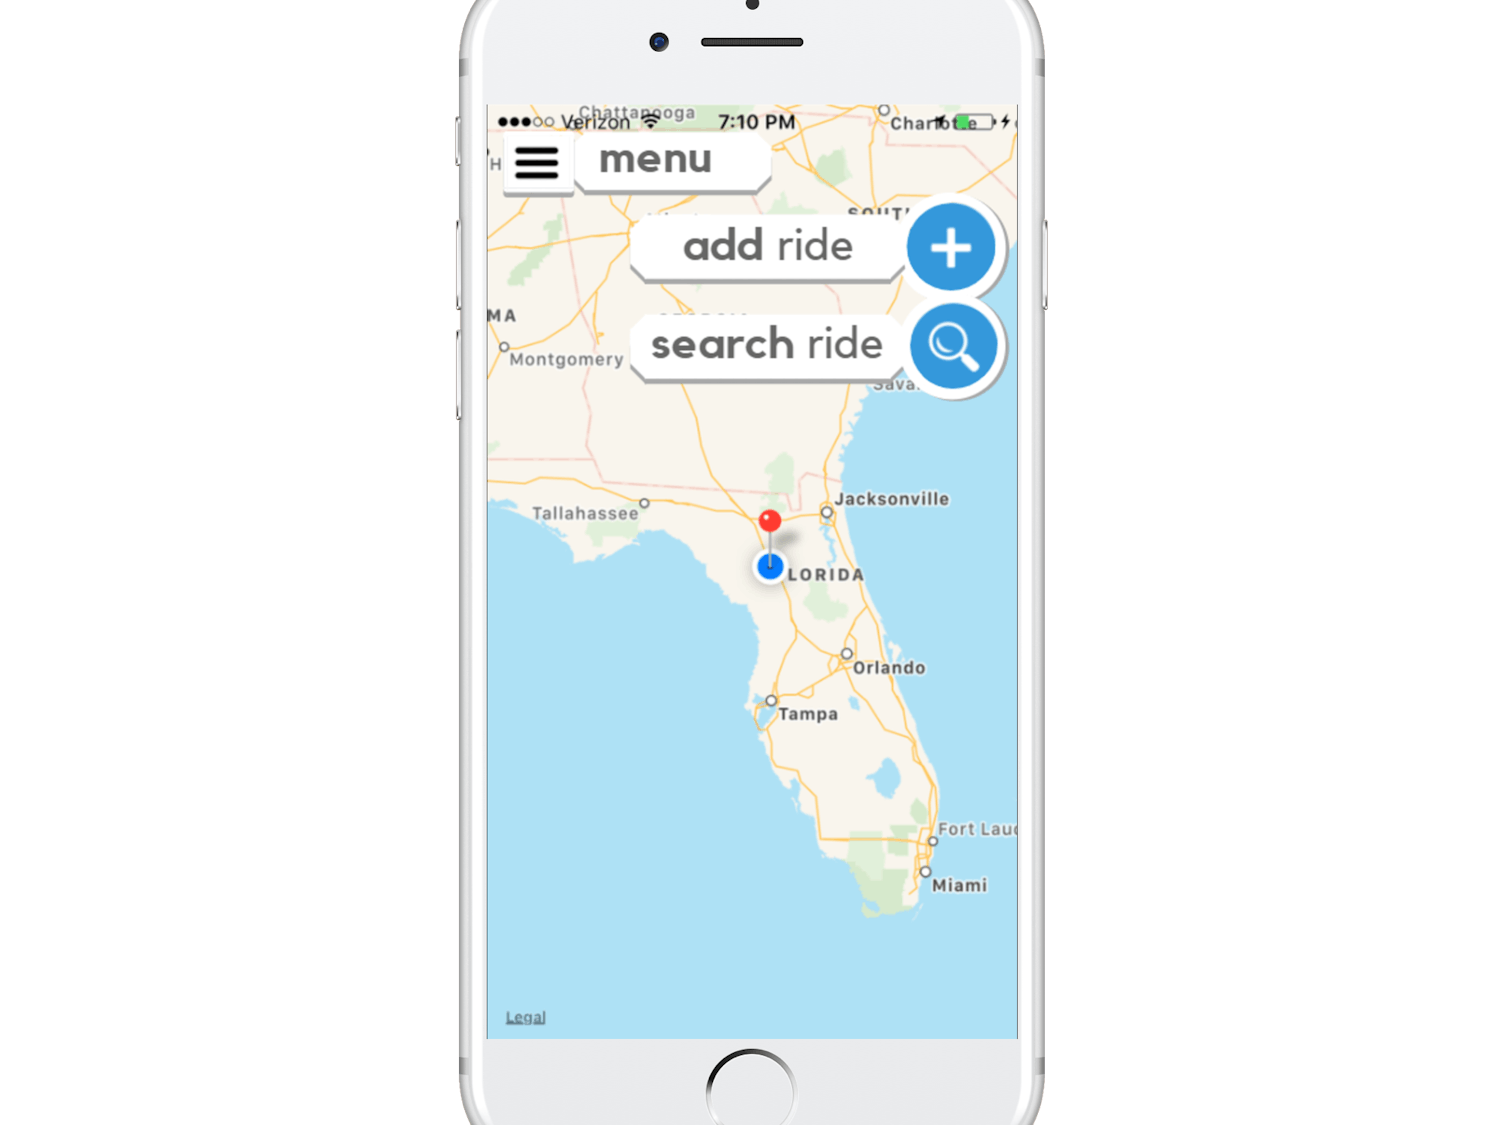 The app, “Wahi Ride,” aims to make carpooling easier and safer for students looking for rides to and from Gainesville.